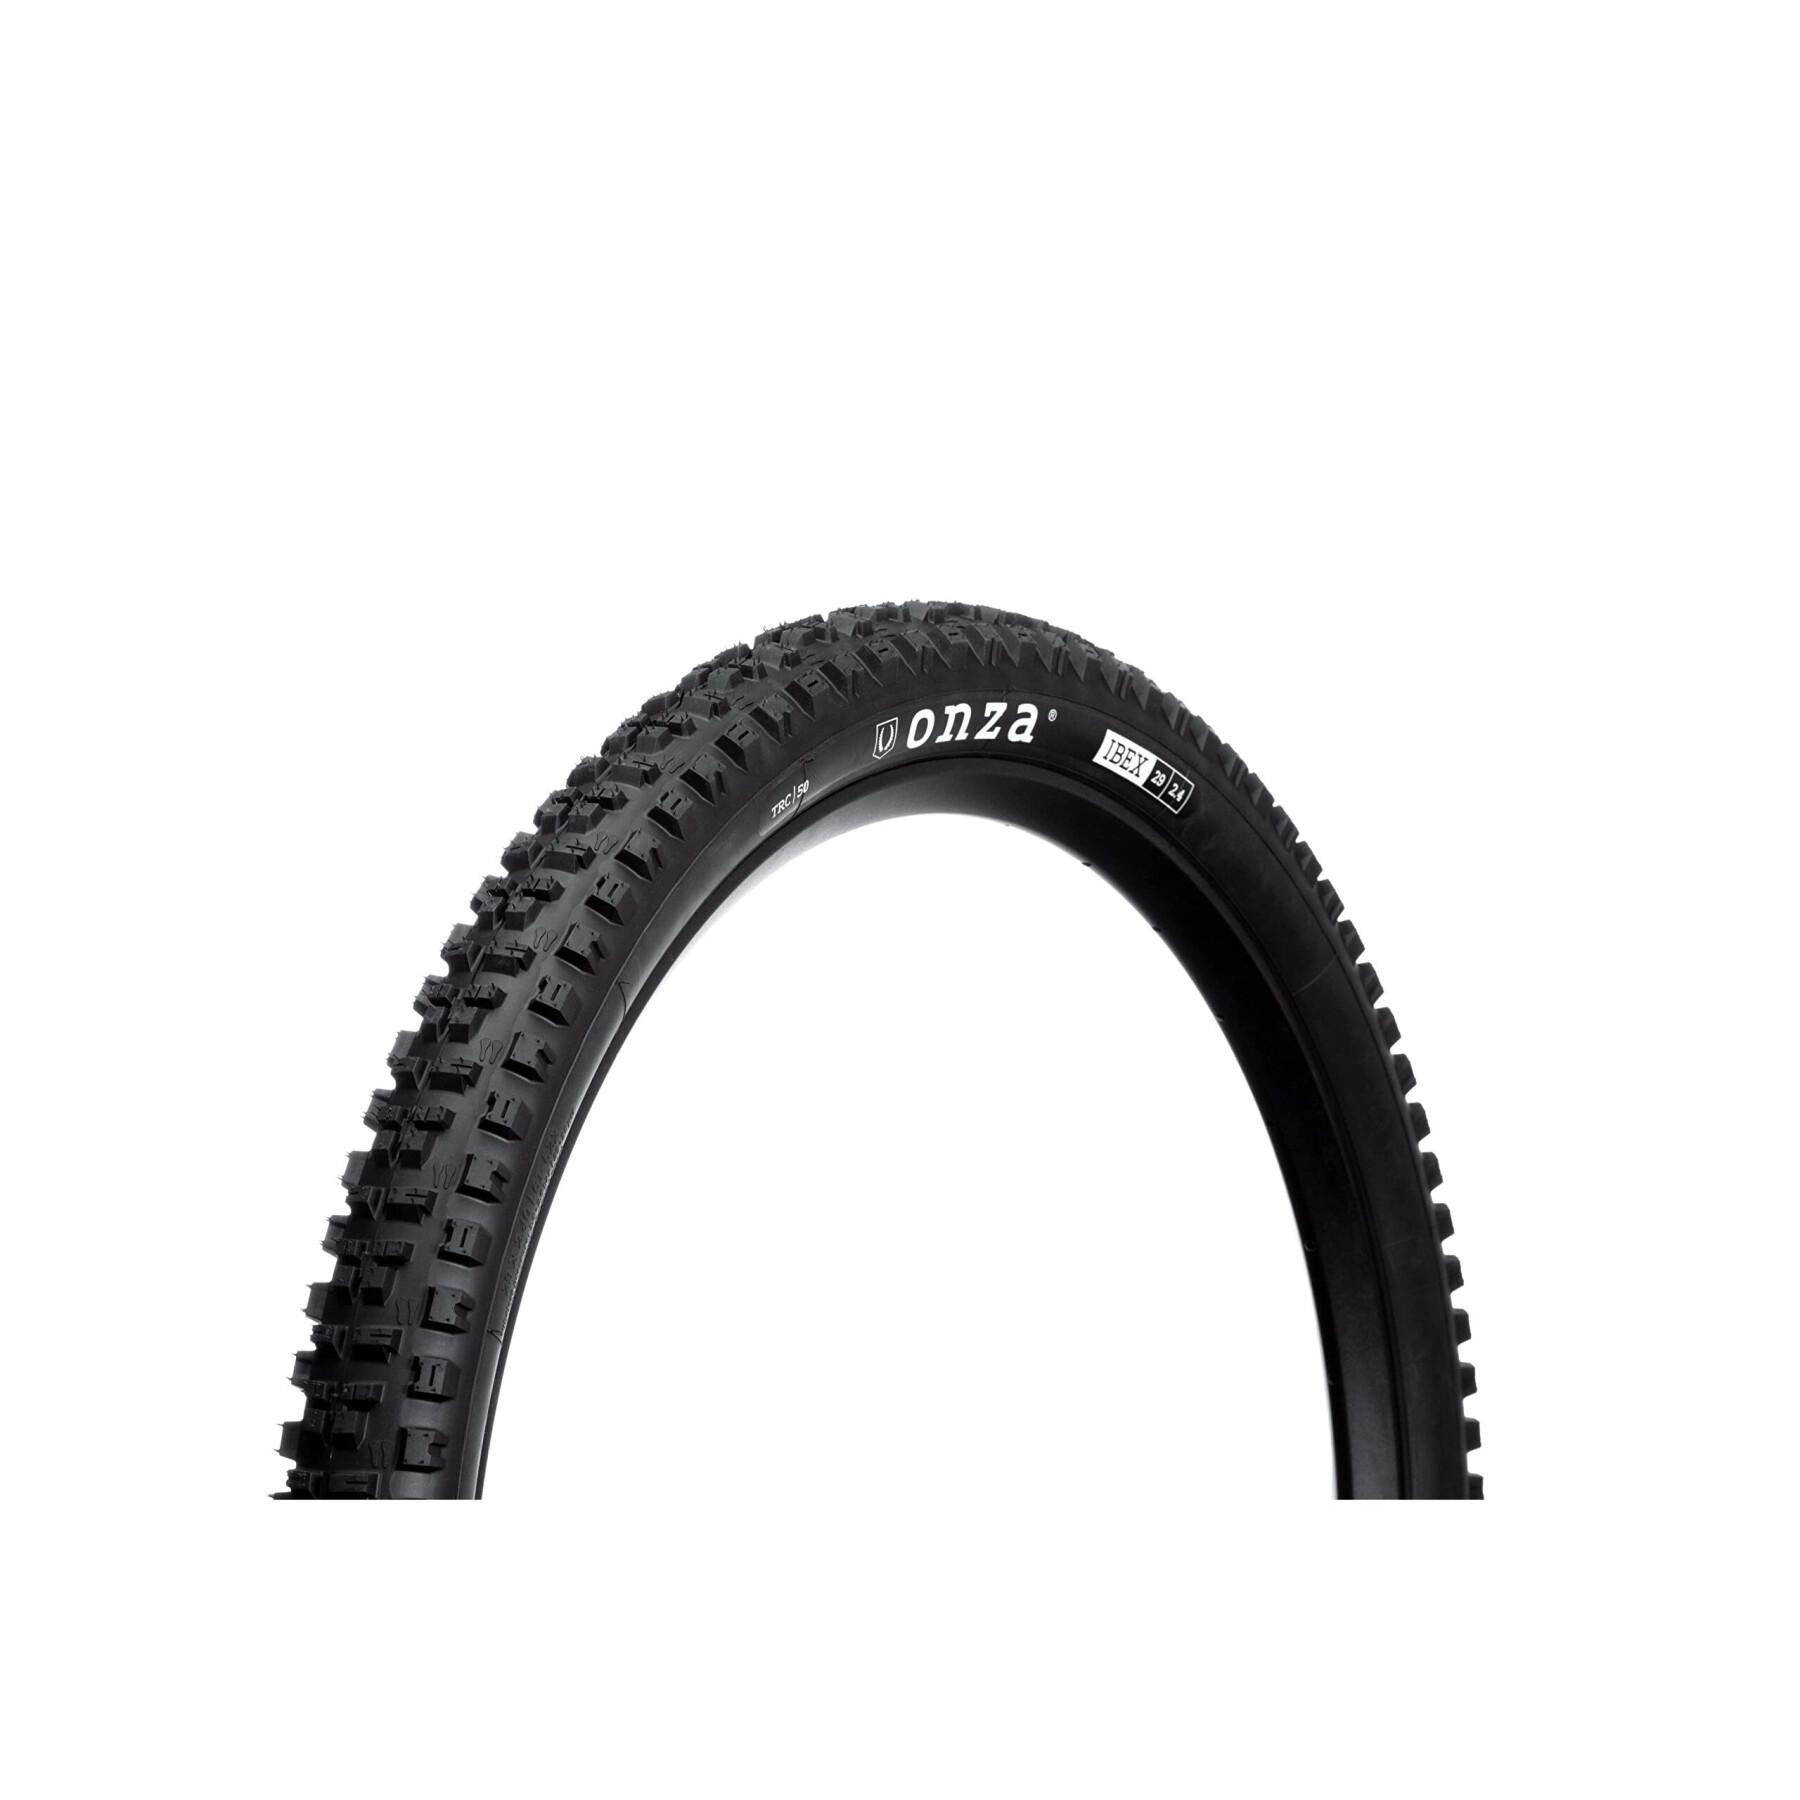 Band Onza Ibex TRC 60 TPI gomme ,50a | 45a, 61-622, 880 g